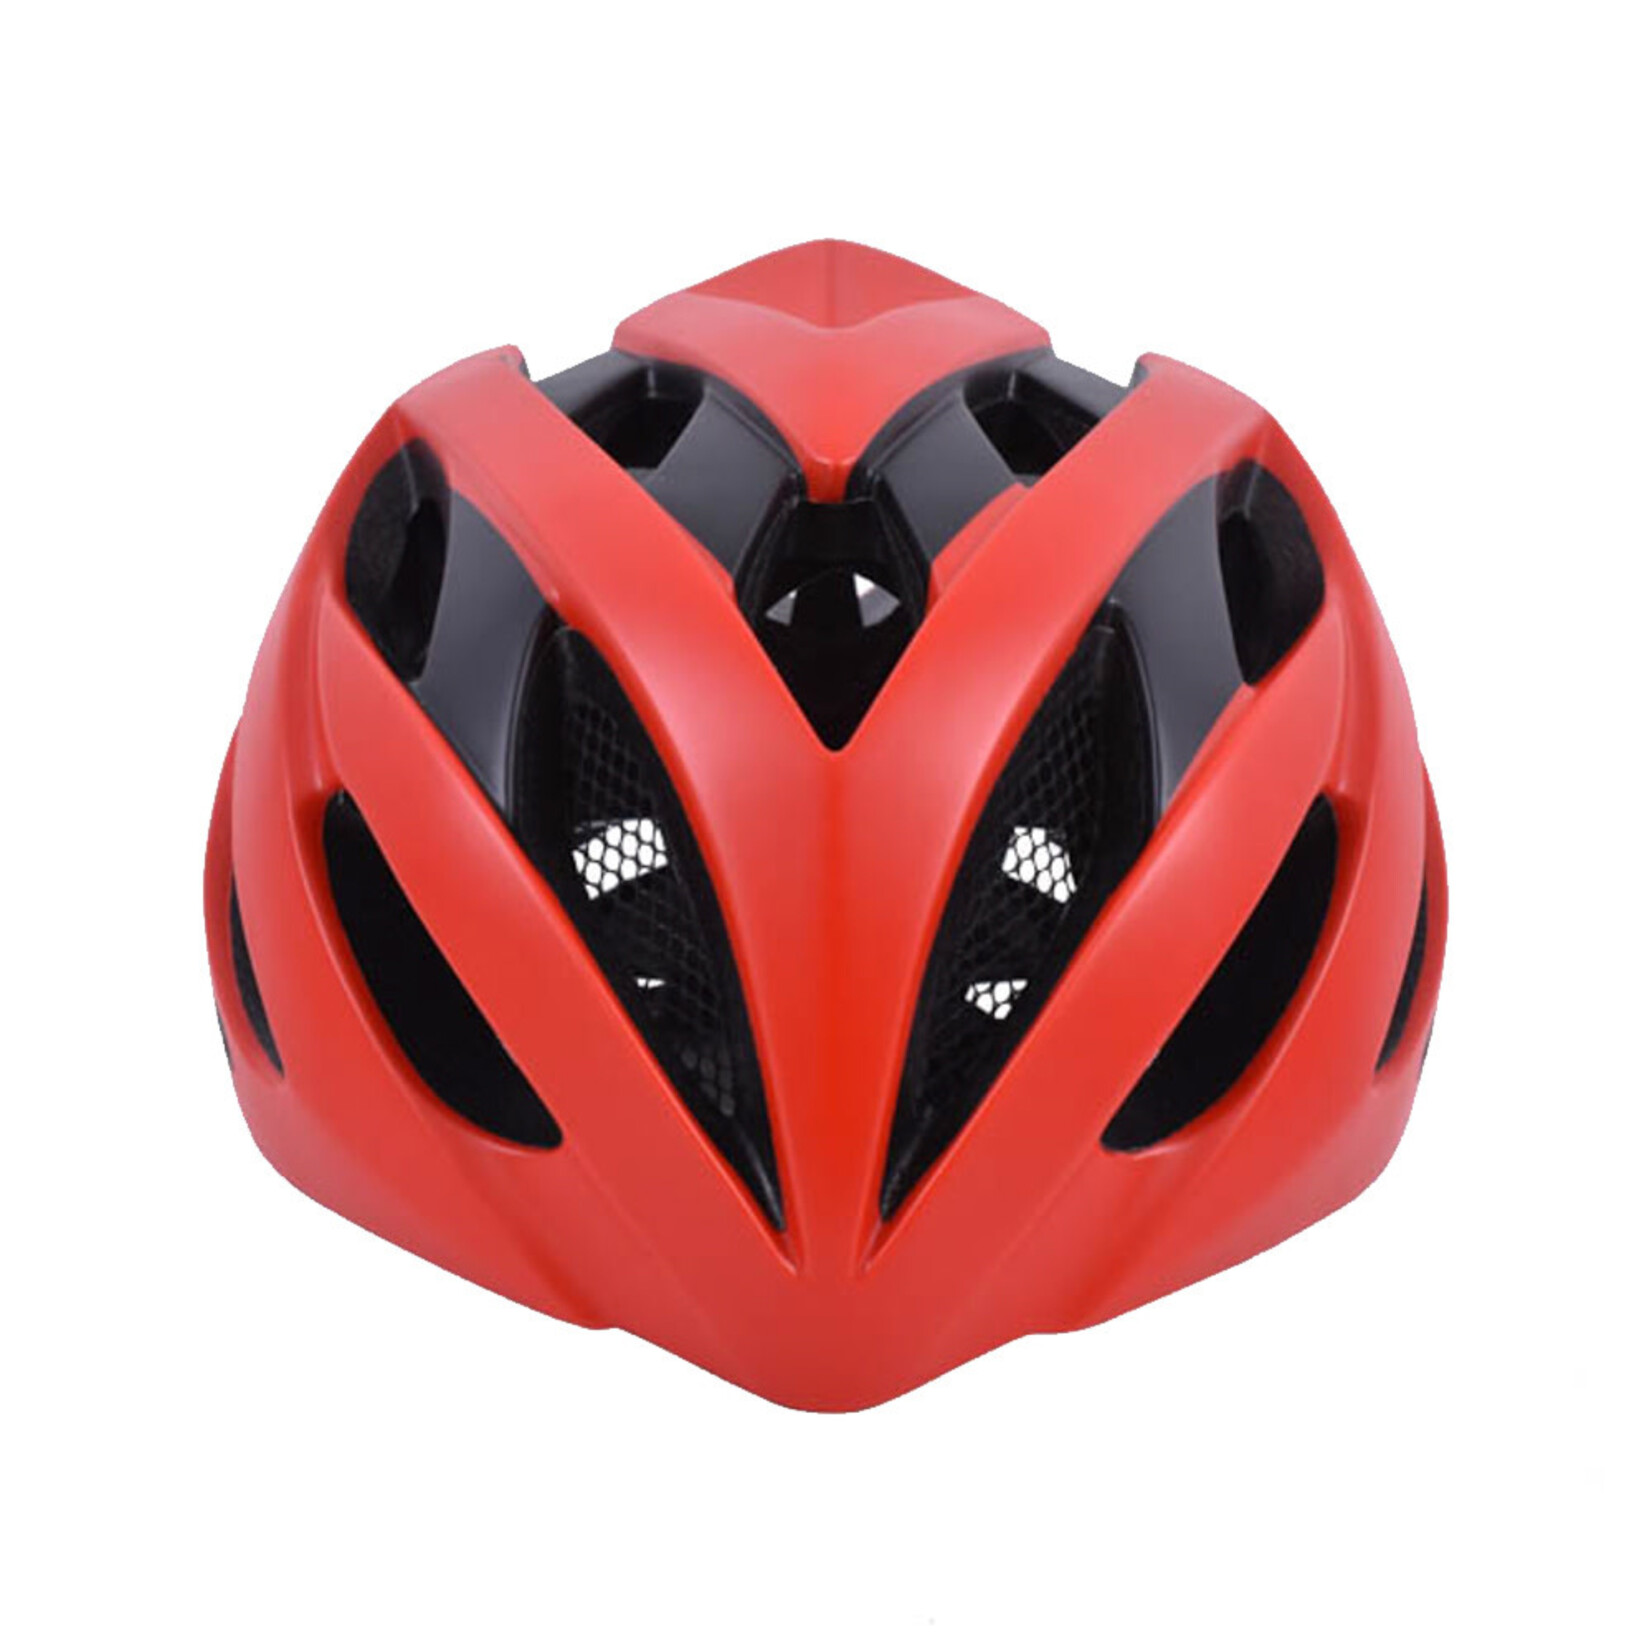 SAFETY LABS Casco AVEX multi-propósito color rojo Safety Labs